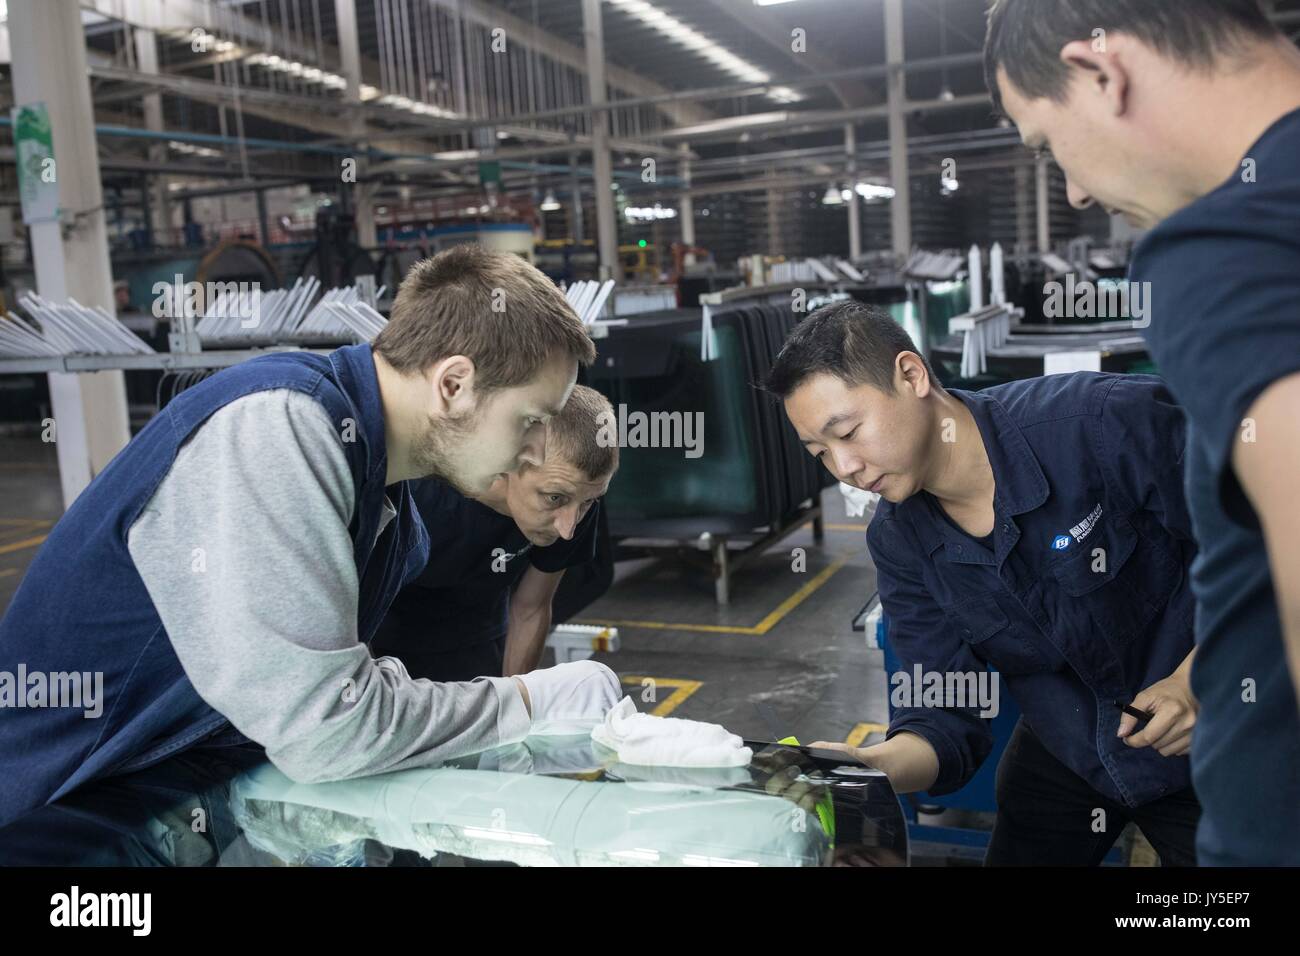 Kaluga, Russia. 18th July, 2017. Chinese and Russian workers work at an automobile-level float glass production line in the Russian factory of China's Fuyao Glass Industry Group Co. in Kaluga, Russia, July 18, 2017. Fuyao Group is a well-known Chinese enterprise that specializes in producing automobile safety glass and industrial technological glass. Fuyao invested in 2011 some 200 million U.S. dollars to build automobile-level float glass production lines in Kaluga. Credit: Wu Zhuang/Xinhua/Alamy Live News Stock Photo